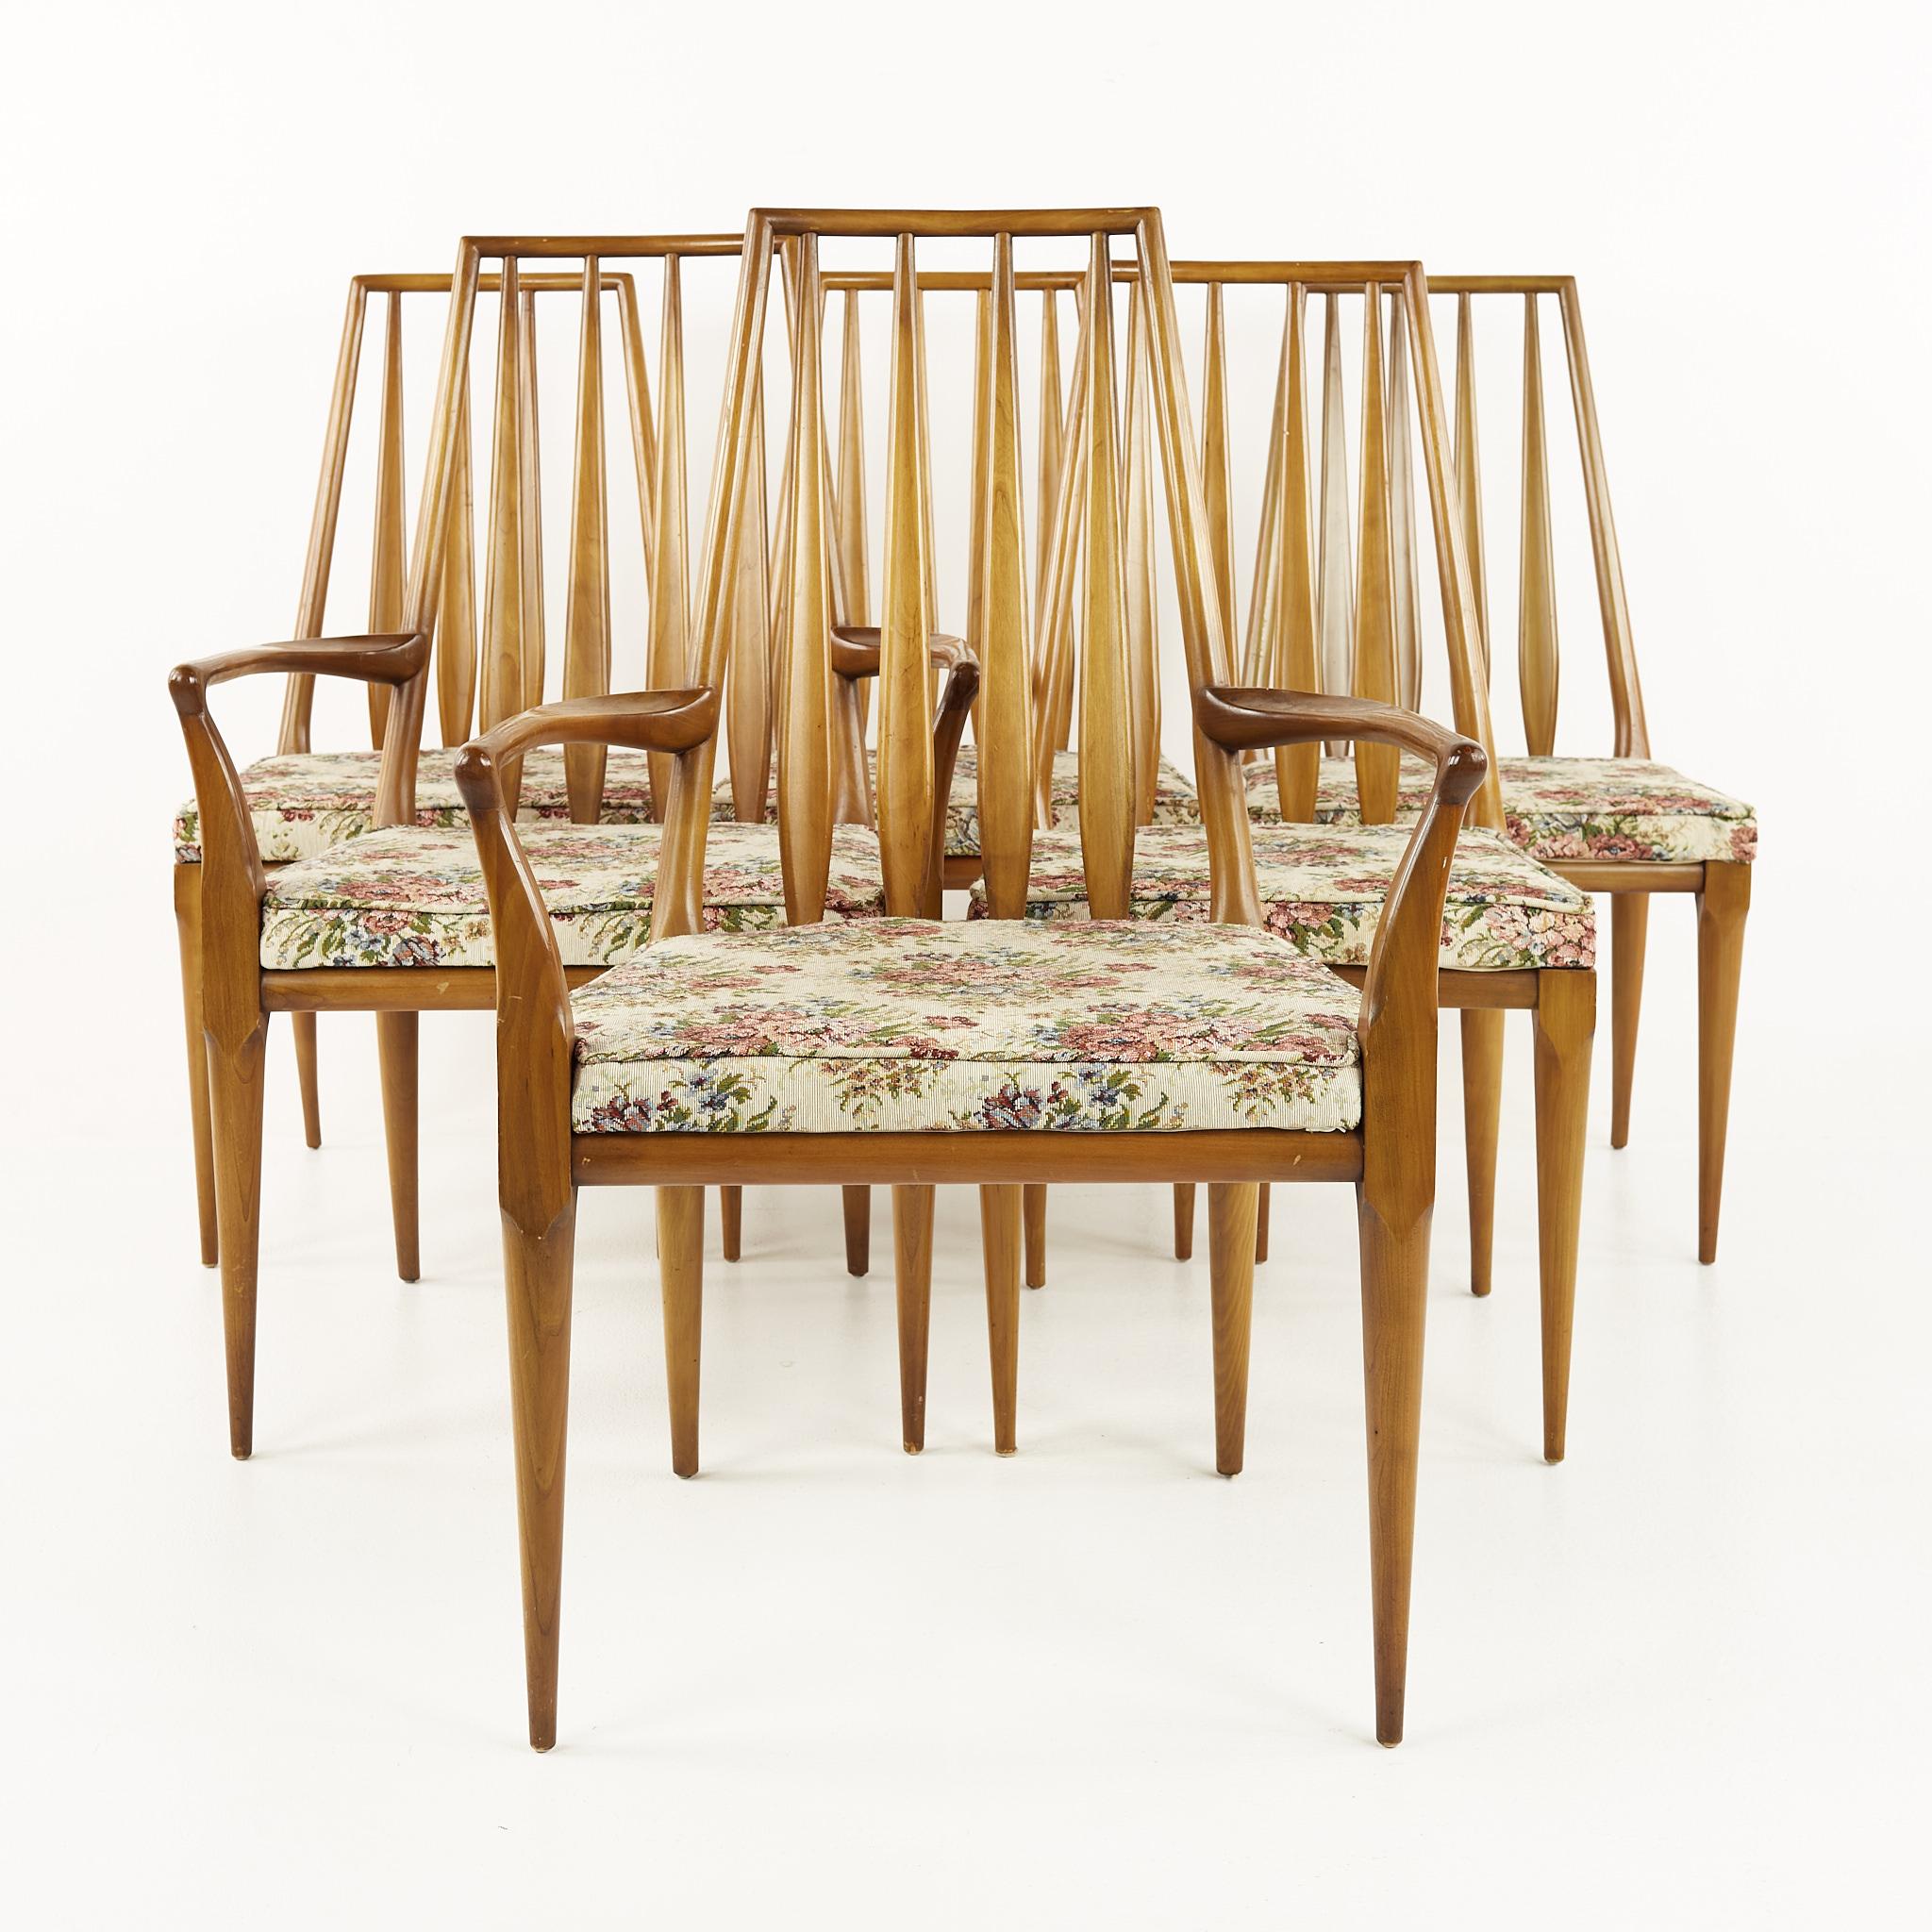 John Widdicomb mid century dining chairs - Set of 6

Each chair measures: 19 wide x 17.5 deep x 37.5 high, with a seat height of 17.5 inches
Captains chairs measure: 23 Wide x 19.5 deep x 37.5 high, with a seat height of 17.5 inches and arm